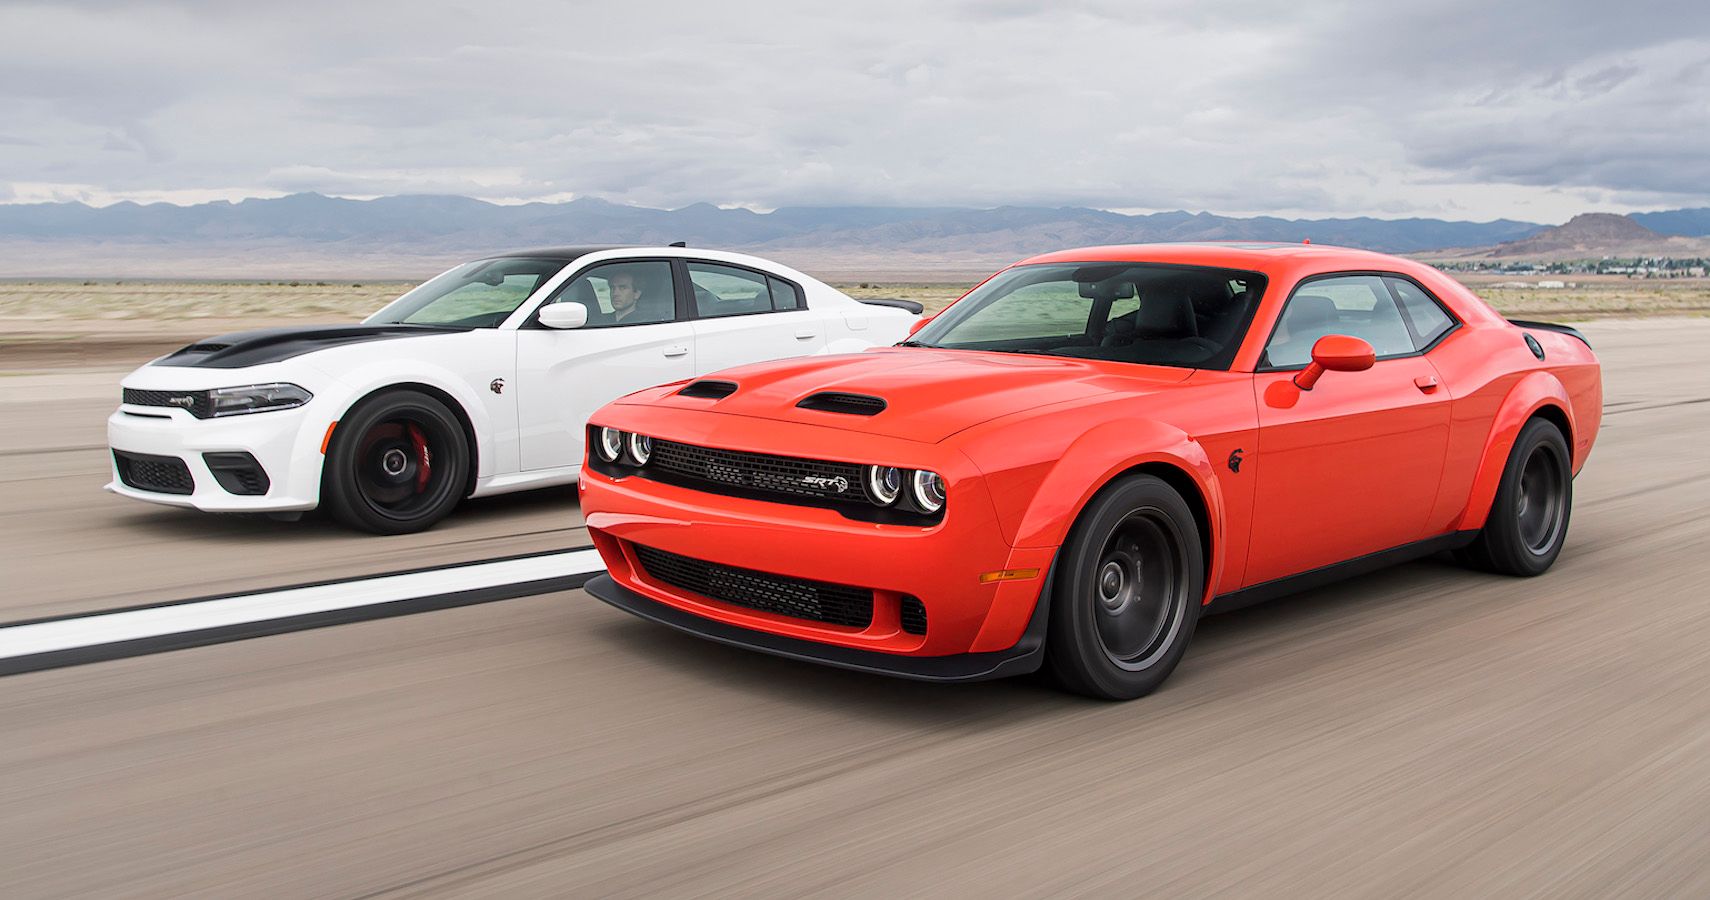 Why Dodge Is Discontinuing Their Classic Muscle Cars